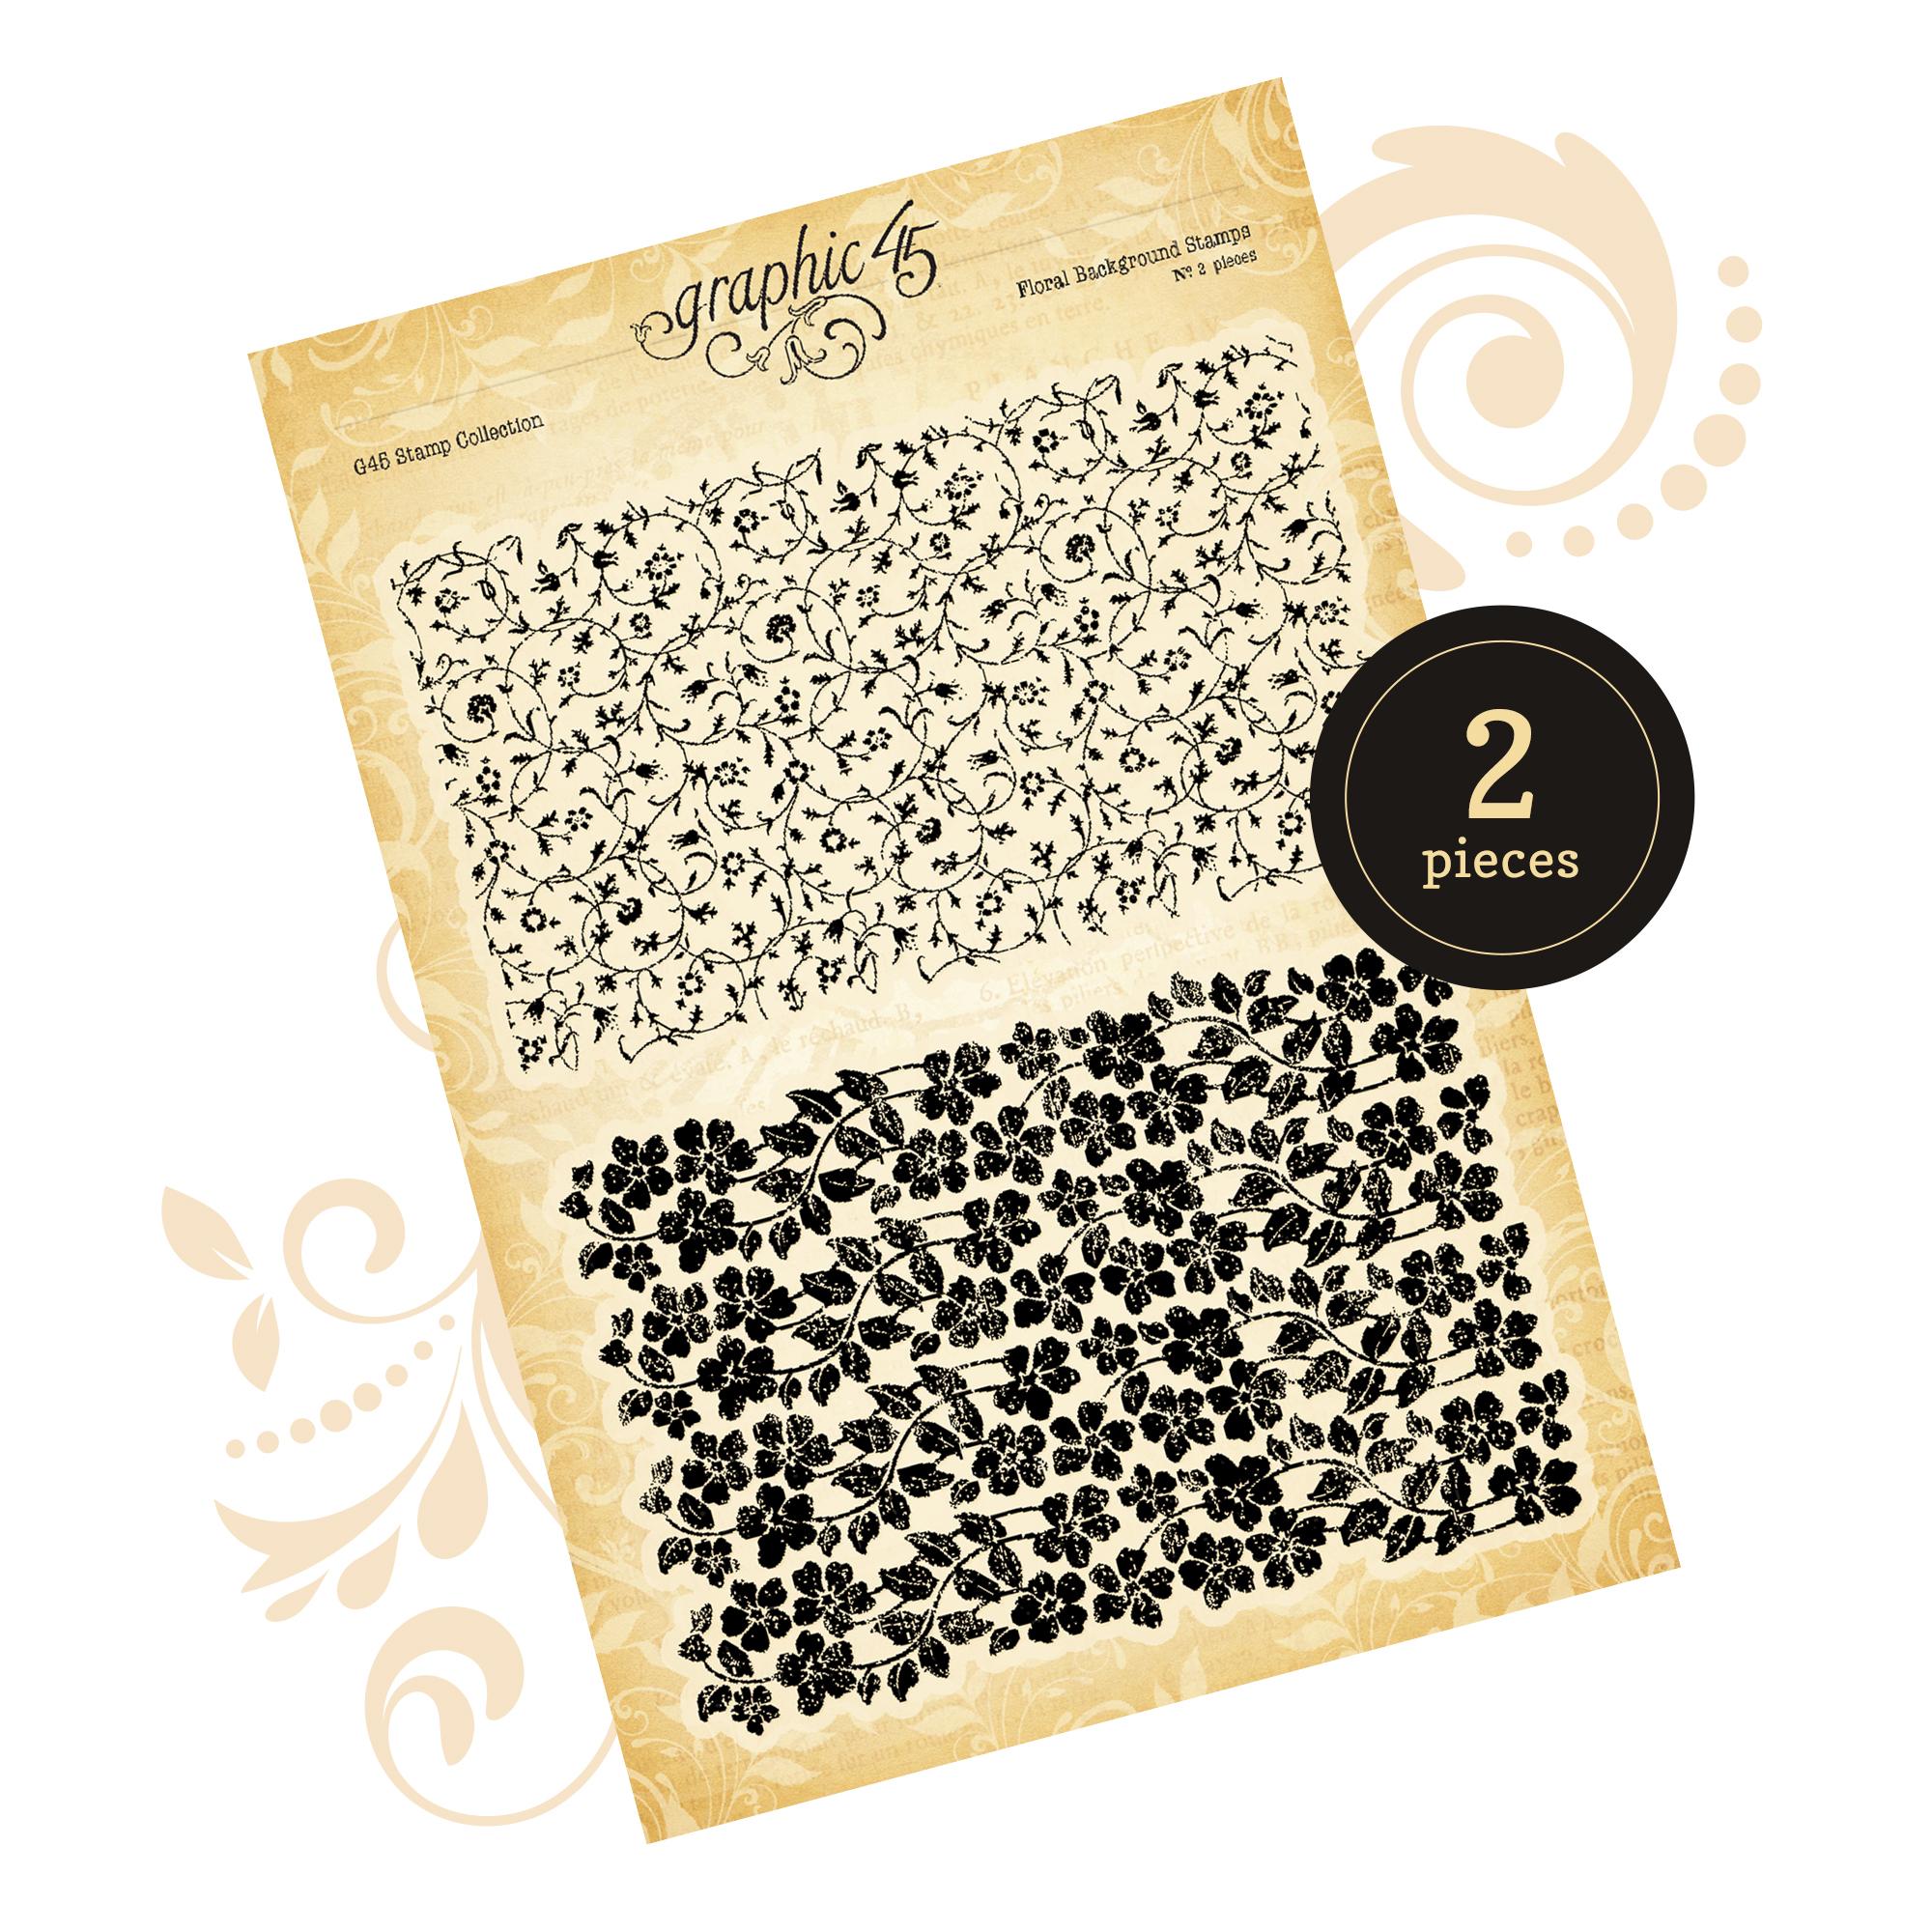 G45 Floral Background Stamps – Graphic 45 Papers